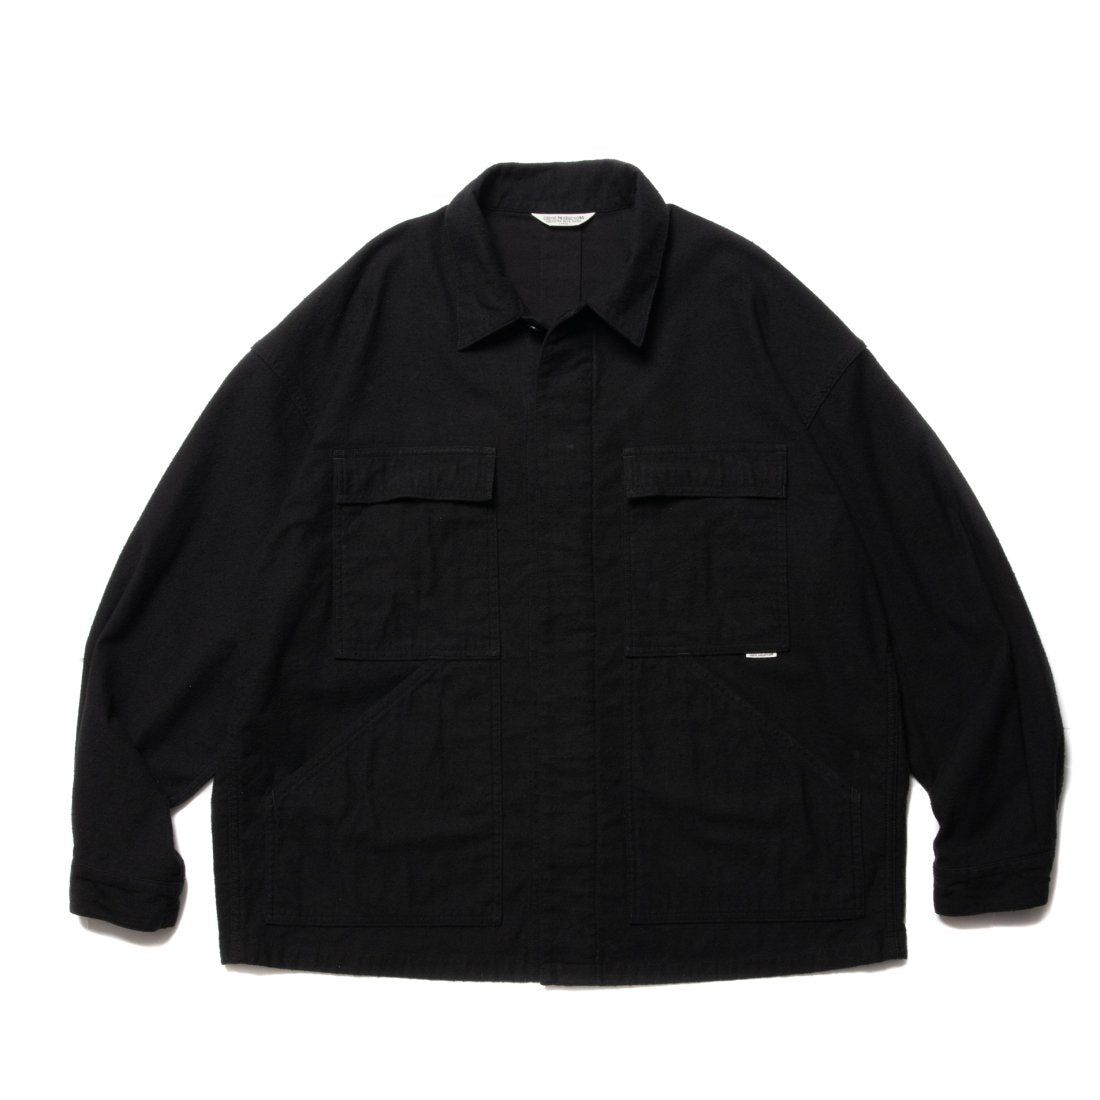 COOTIE PRODUCTIONS® / SILK NEP WORK JACKET